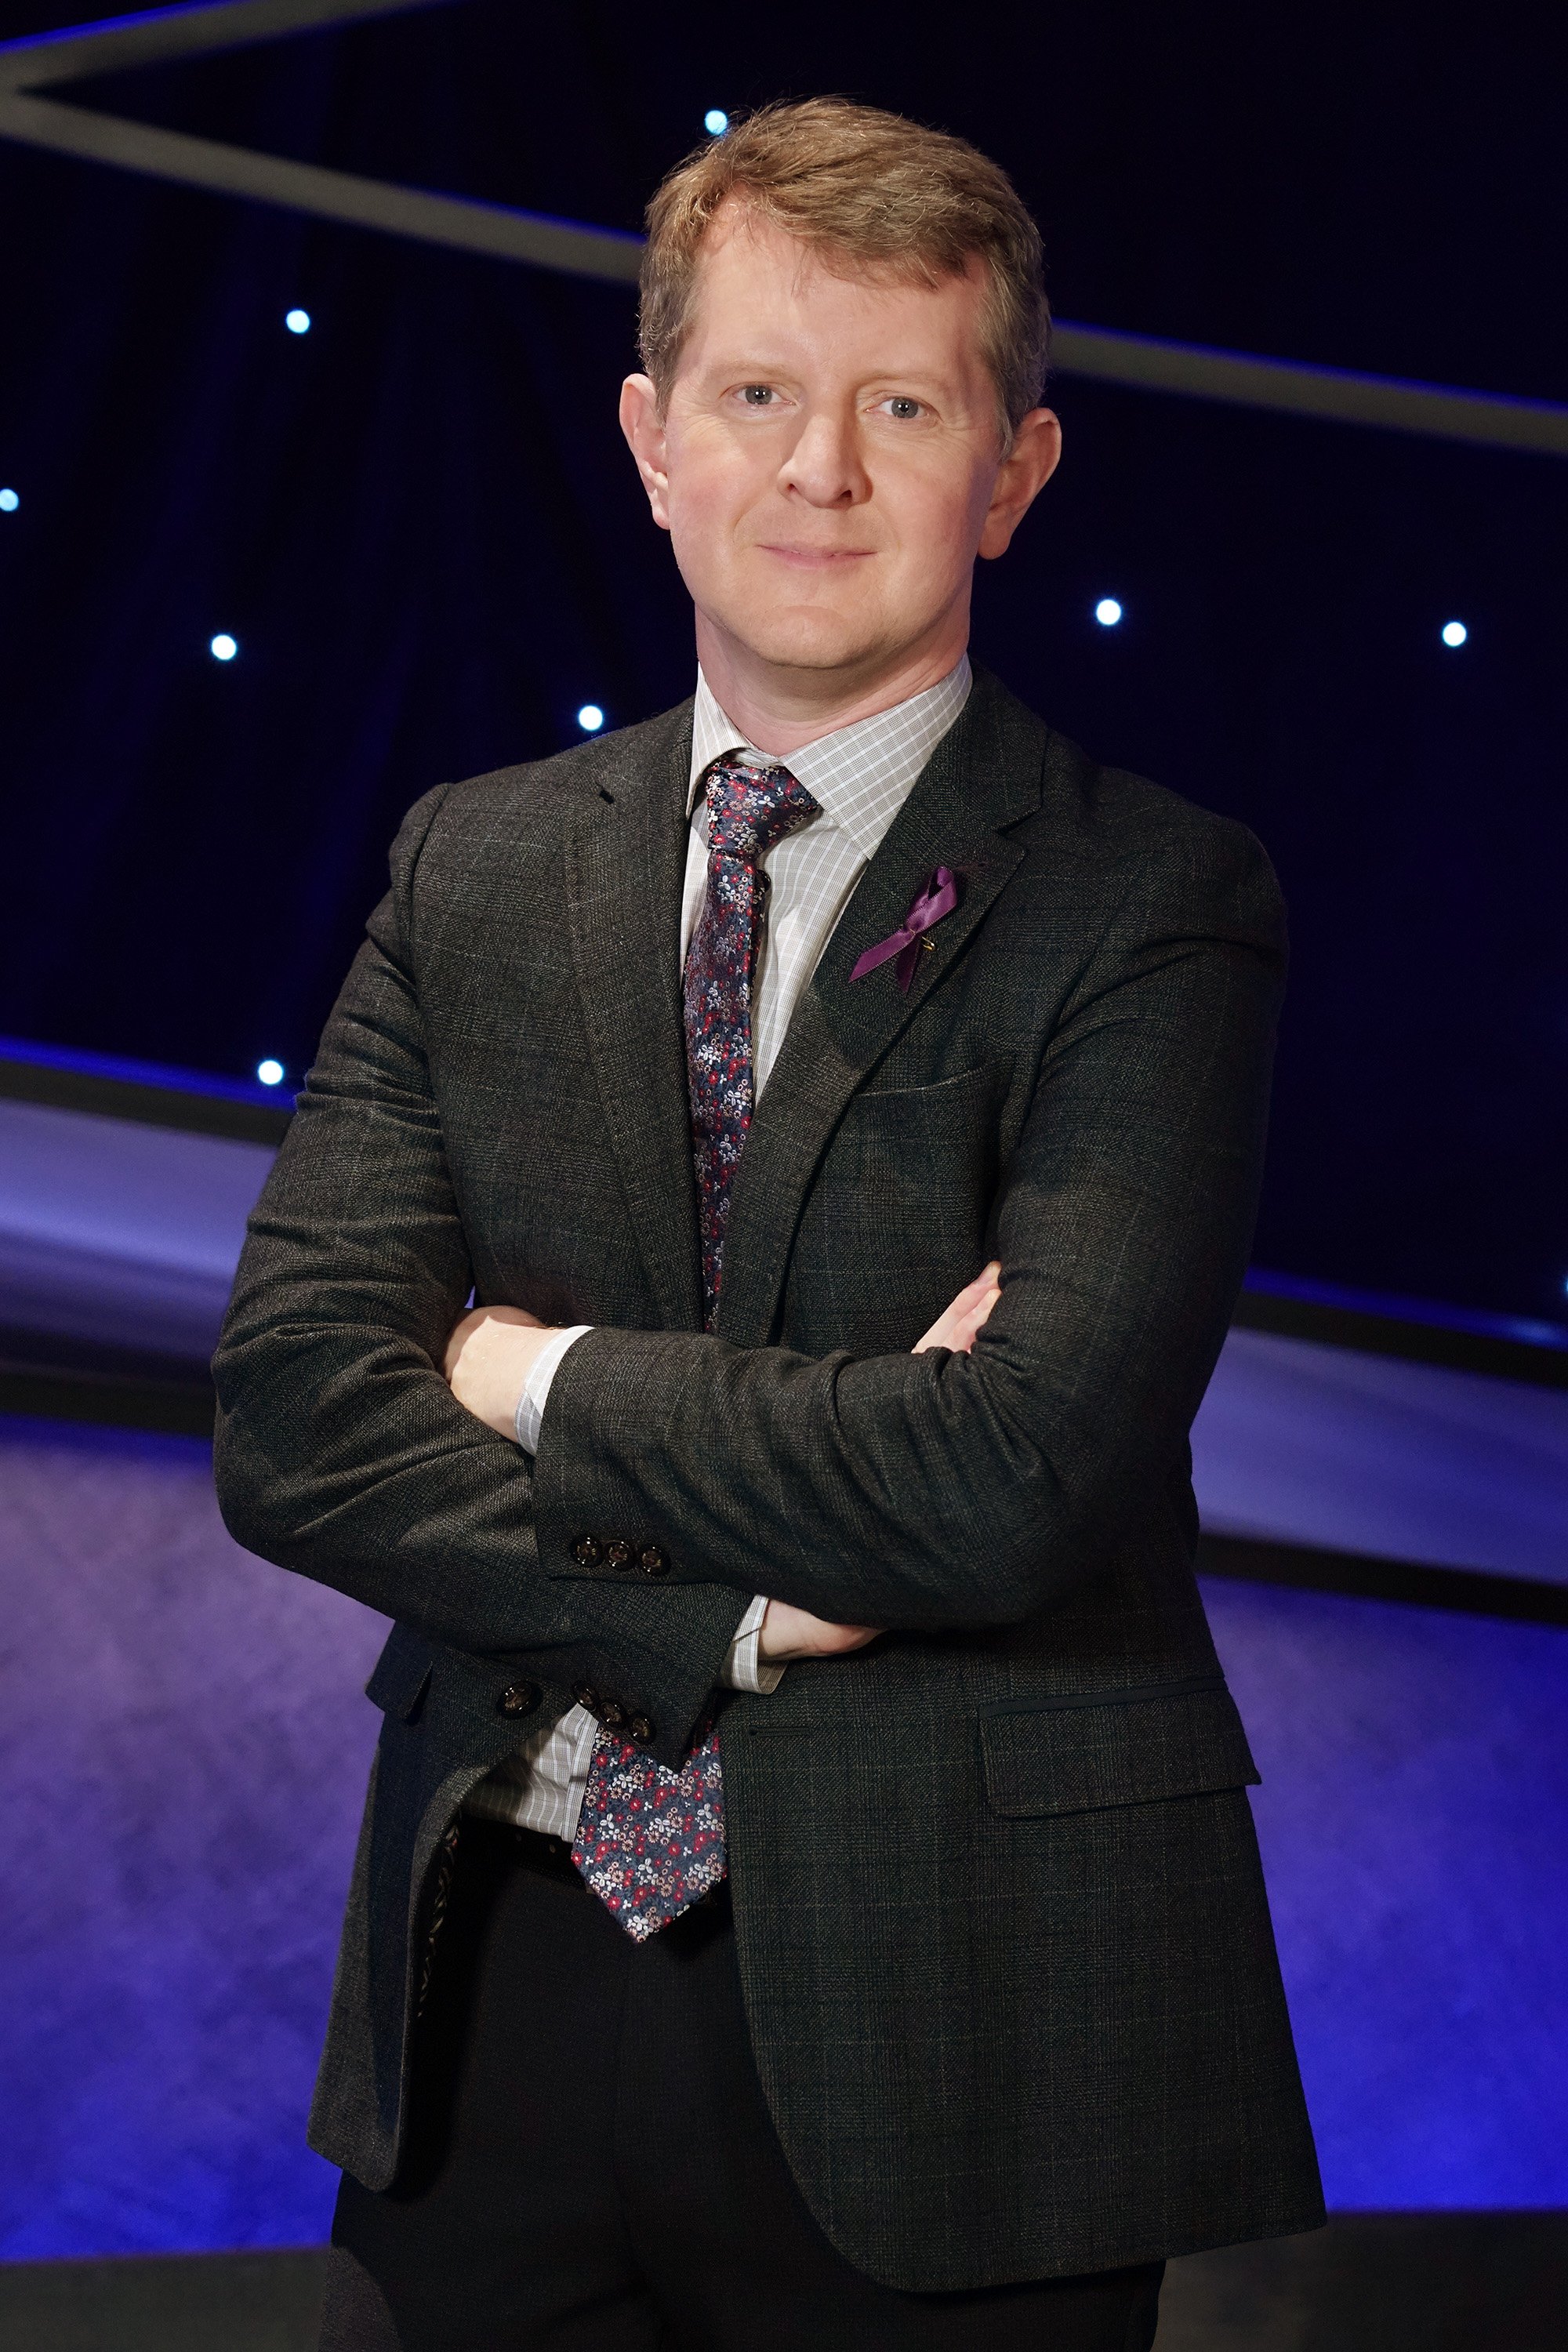 Ken Jennings of the "Jeopardy!" pictured in December 2019. | Source: Getty Images